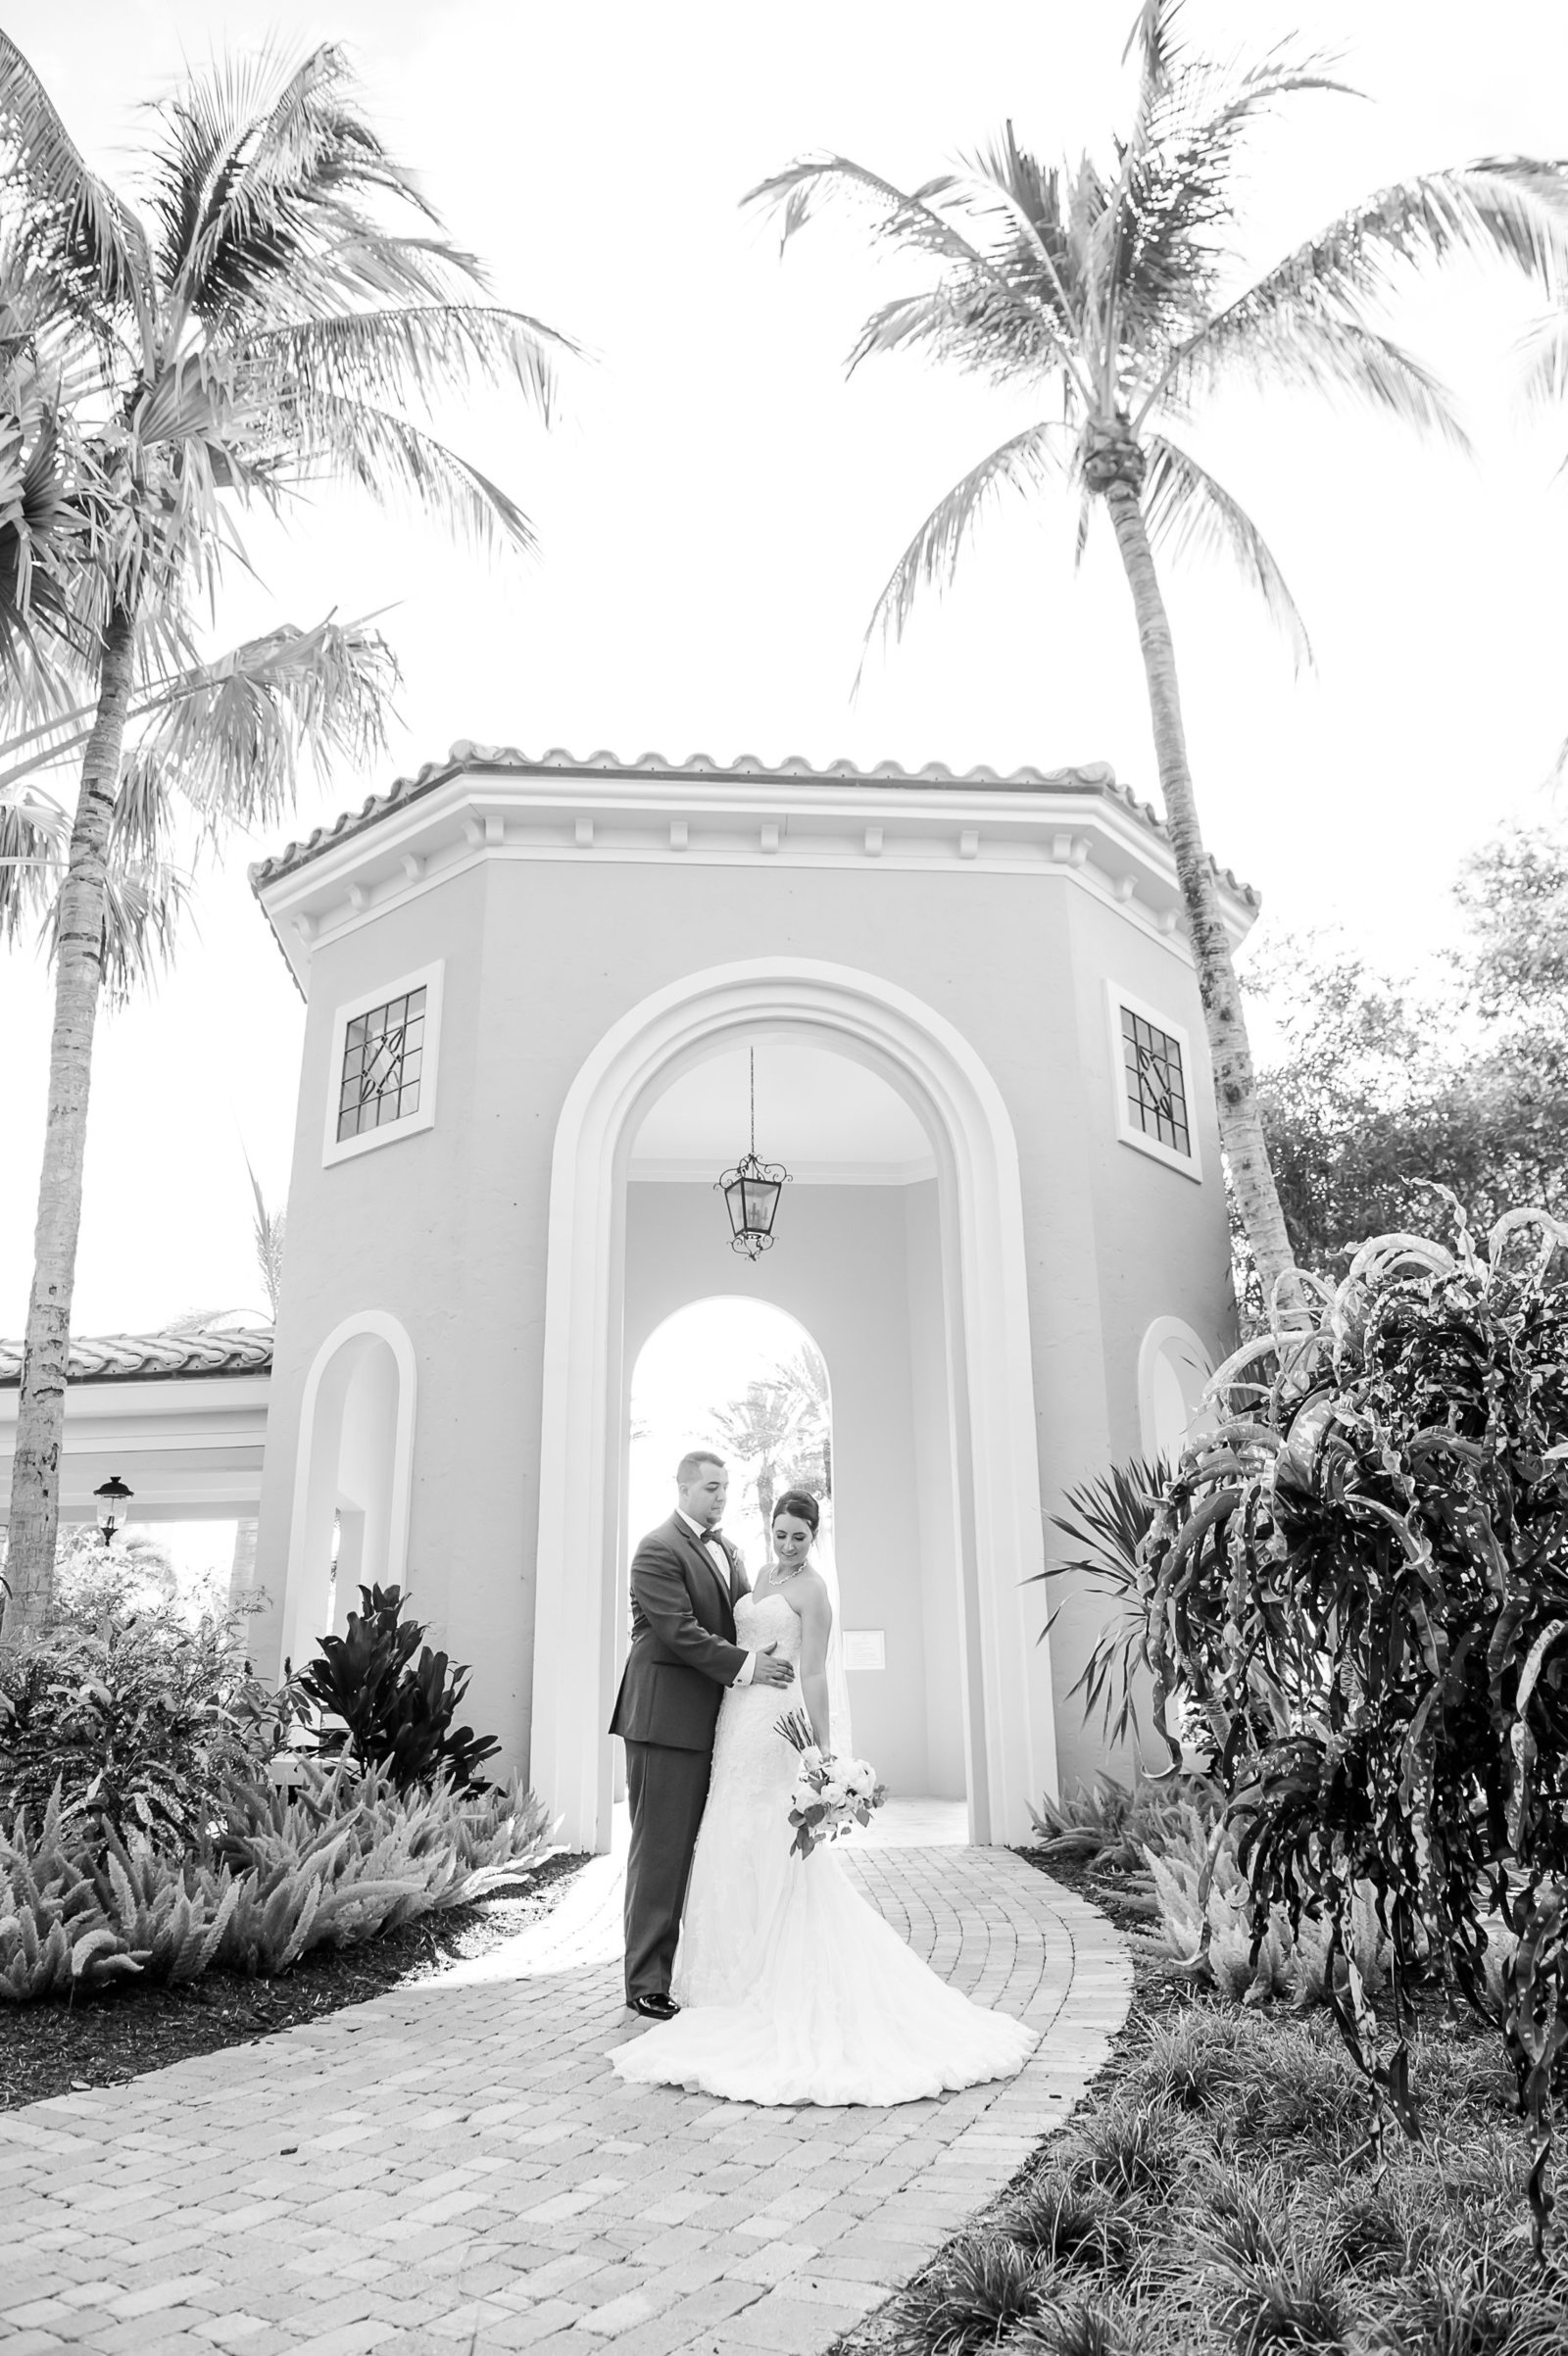 Wedding Architecture - Country Club at Mirasol Wedding - Palm Beach Wedding Photography by Palm Beach Photography, Inc.